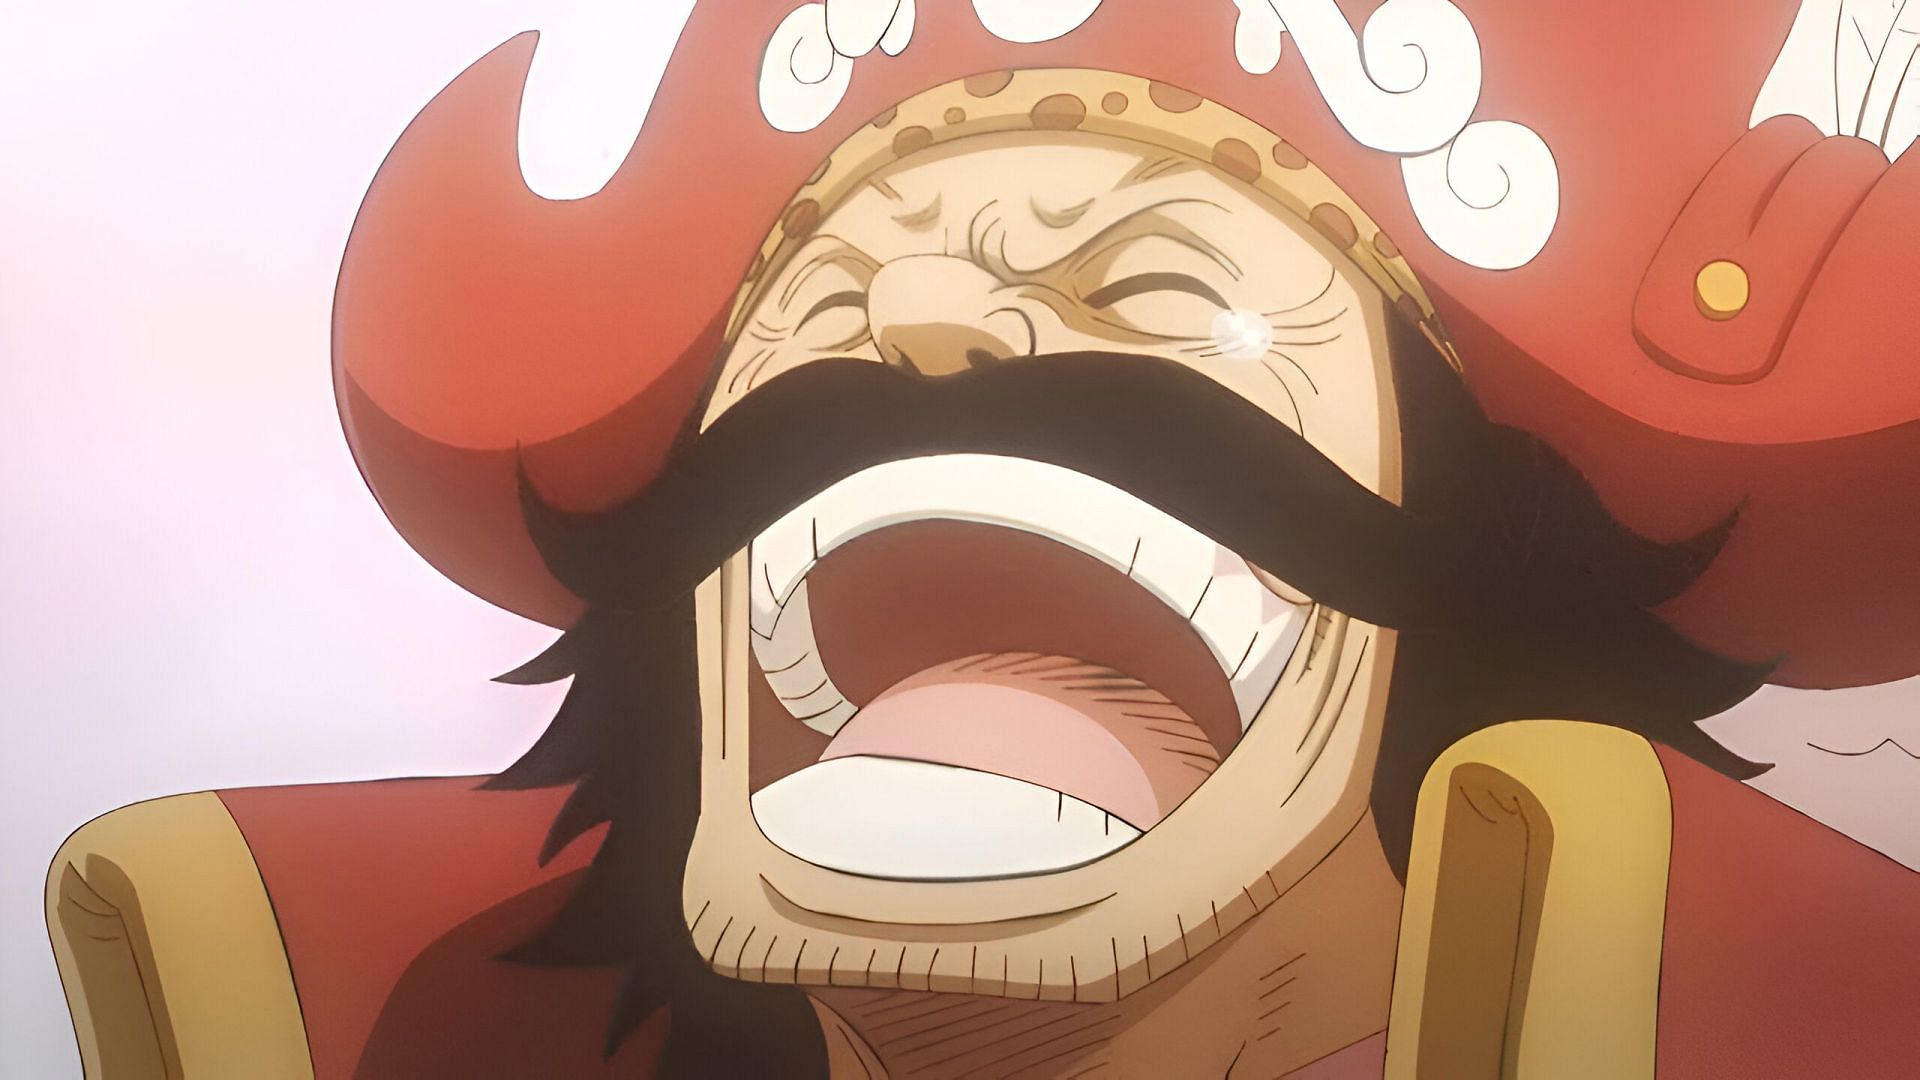 Chapter 1114 spoilers all but confirm Roger started the Great Pirate Era with One Piece